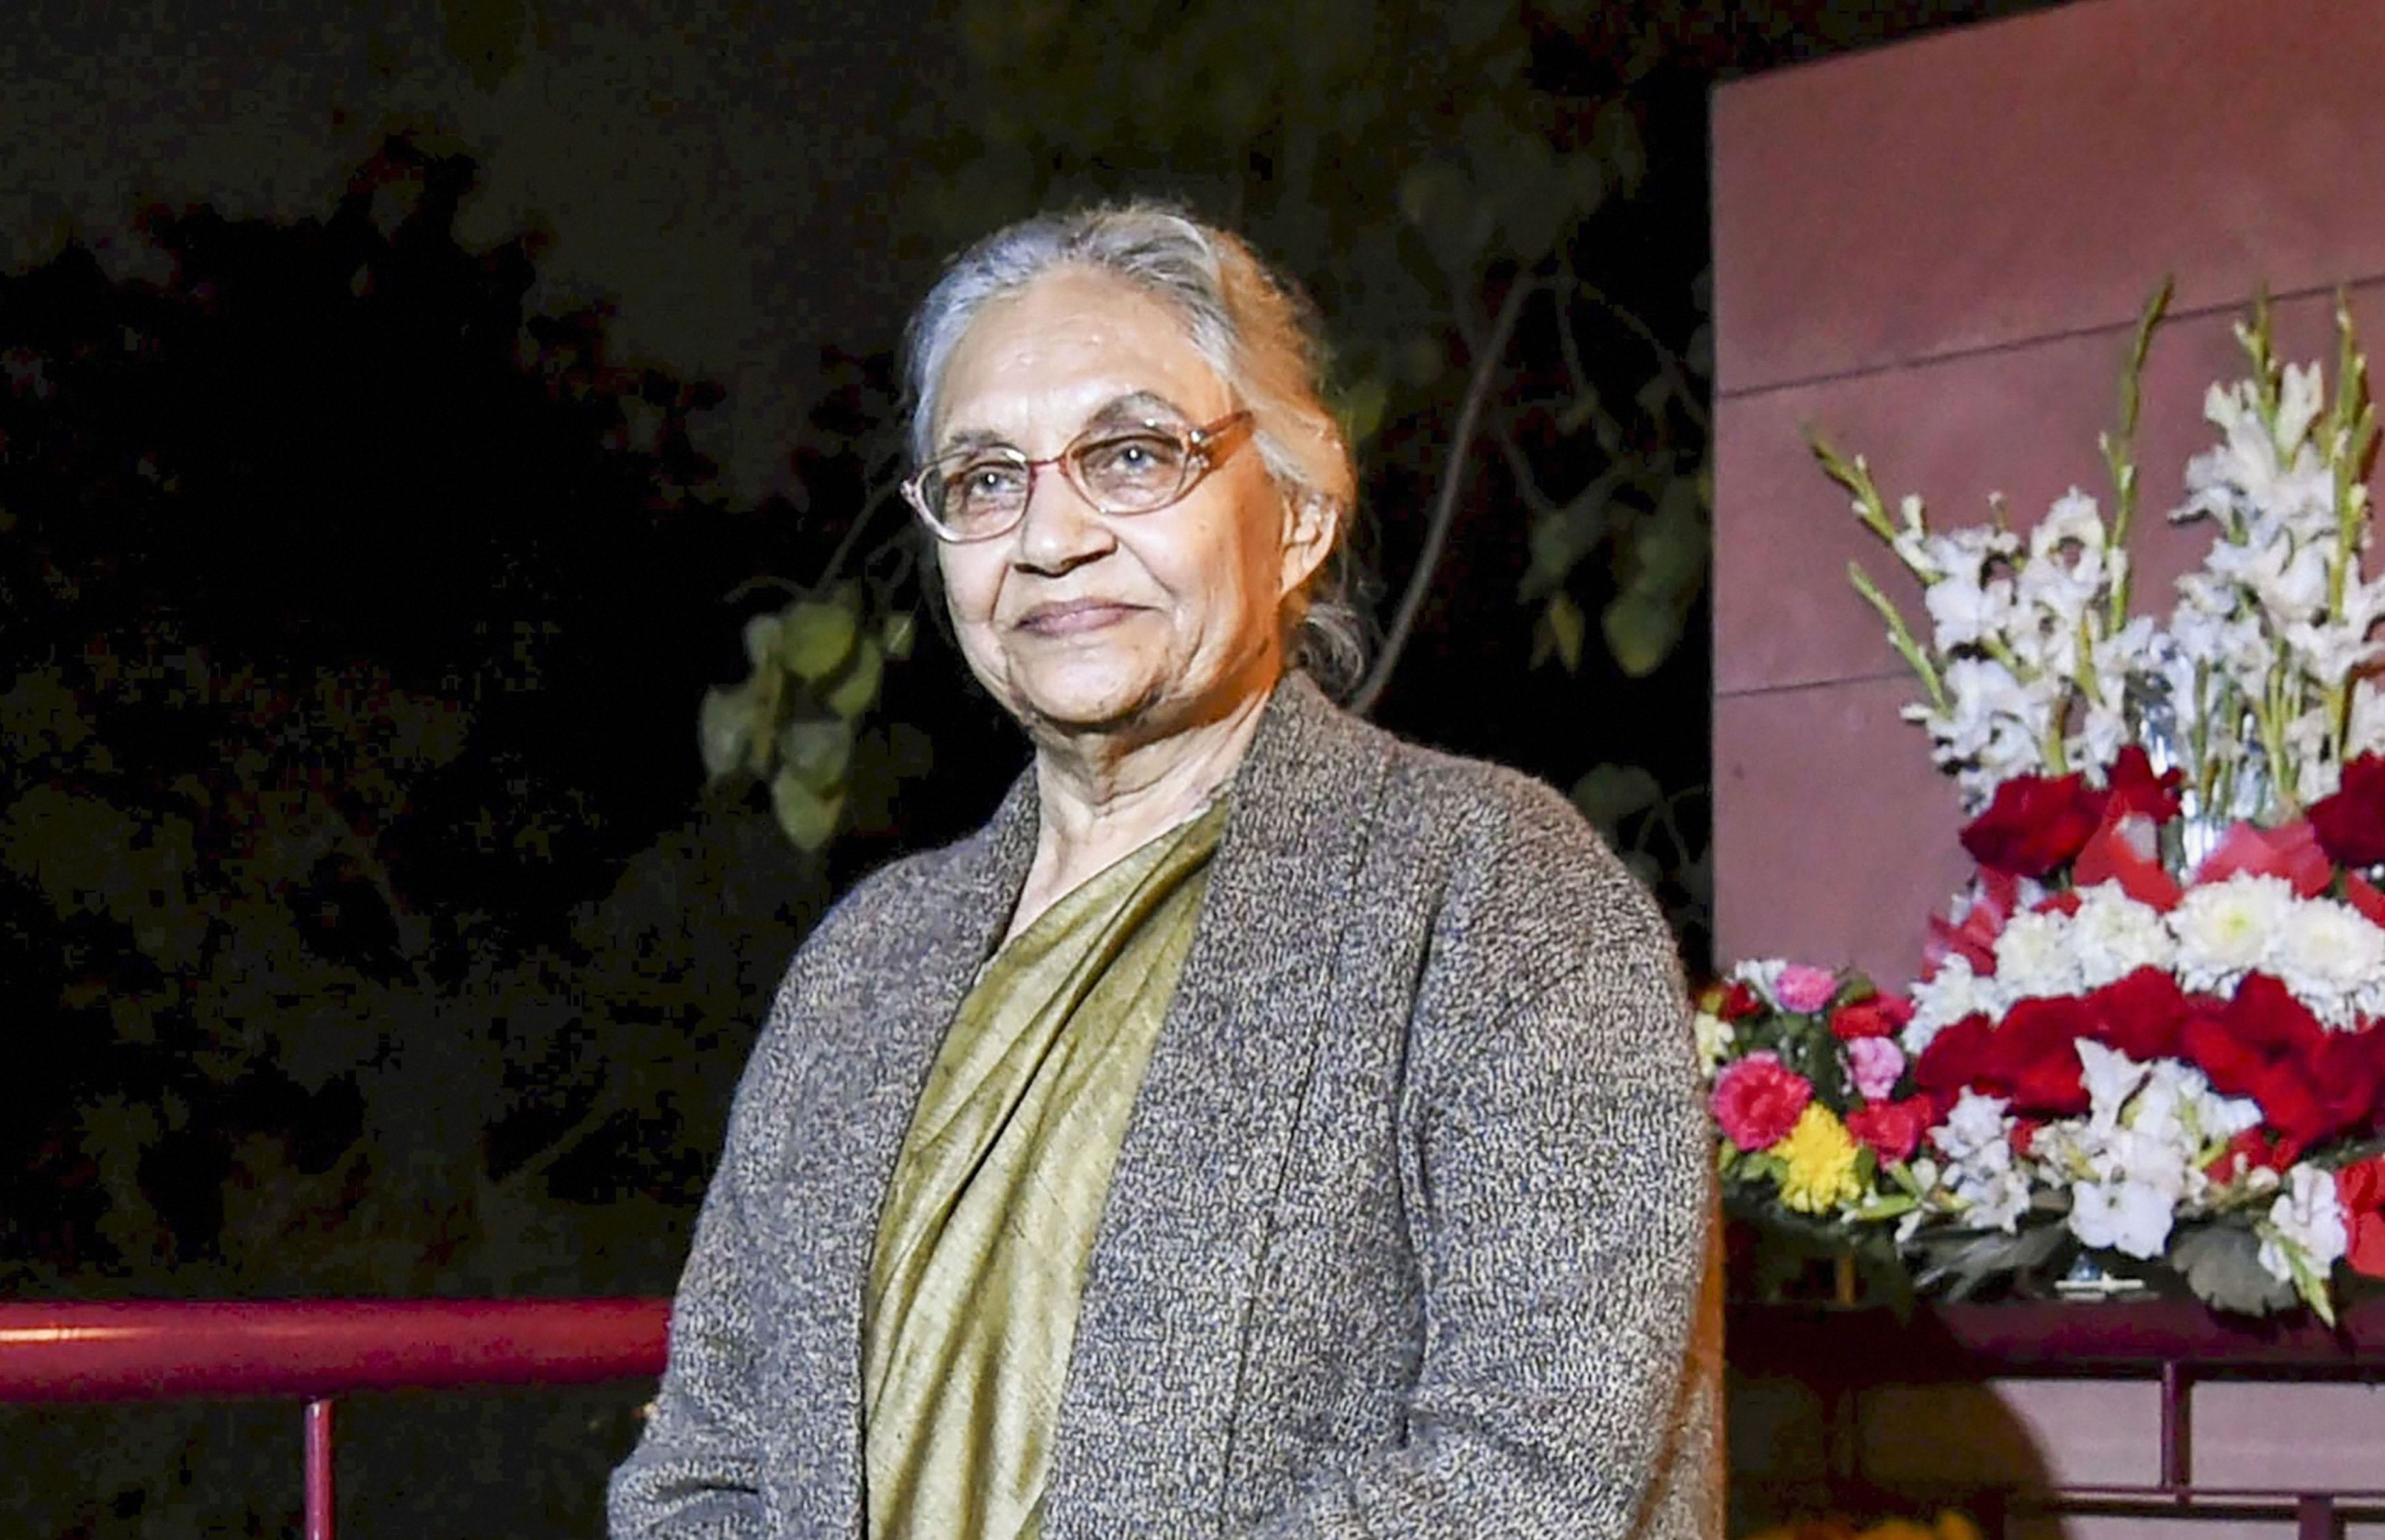 Beloved by all, Delhi pays tributes to its architect Sheila Dikshit